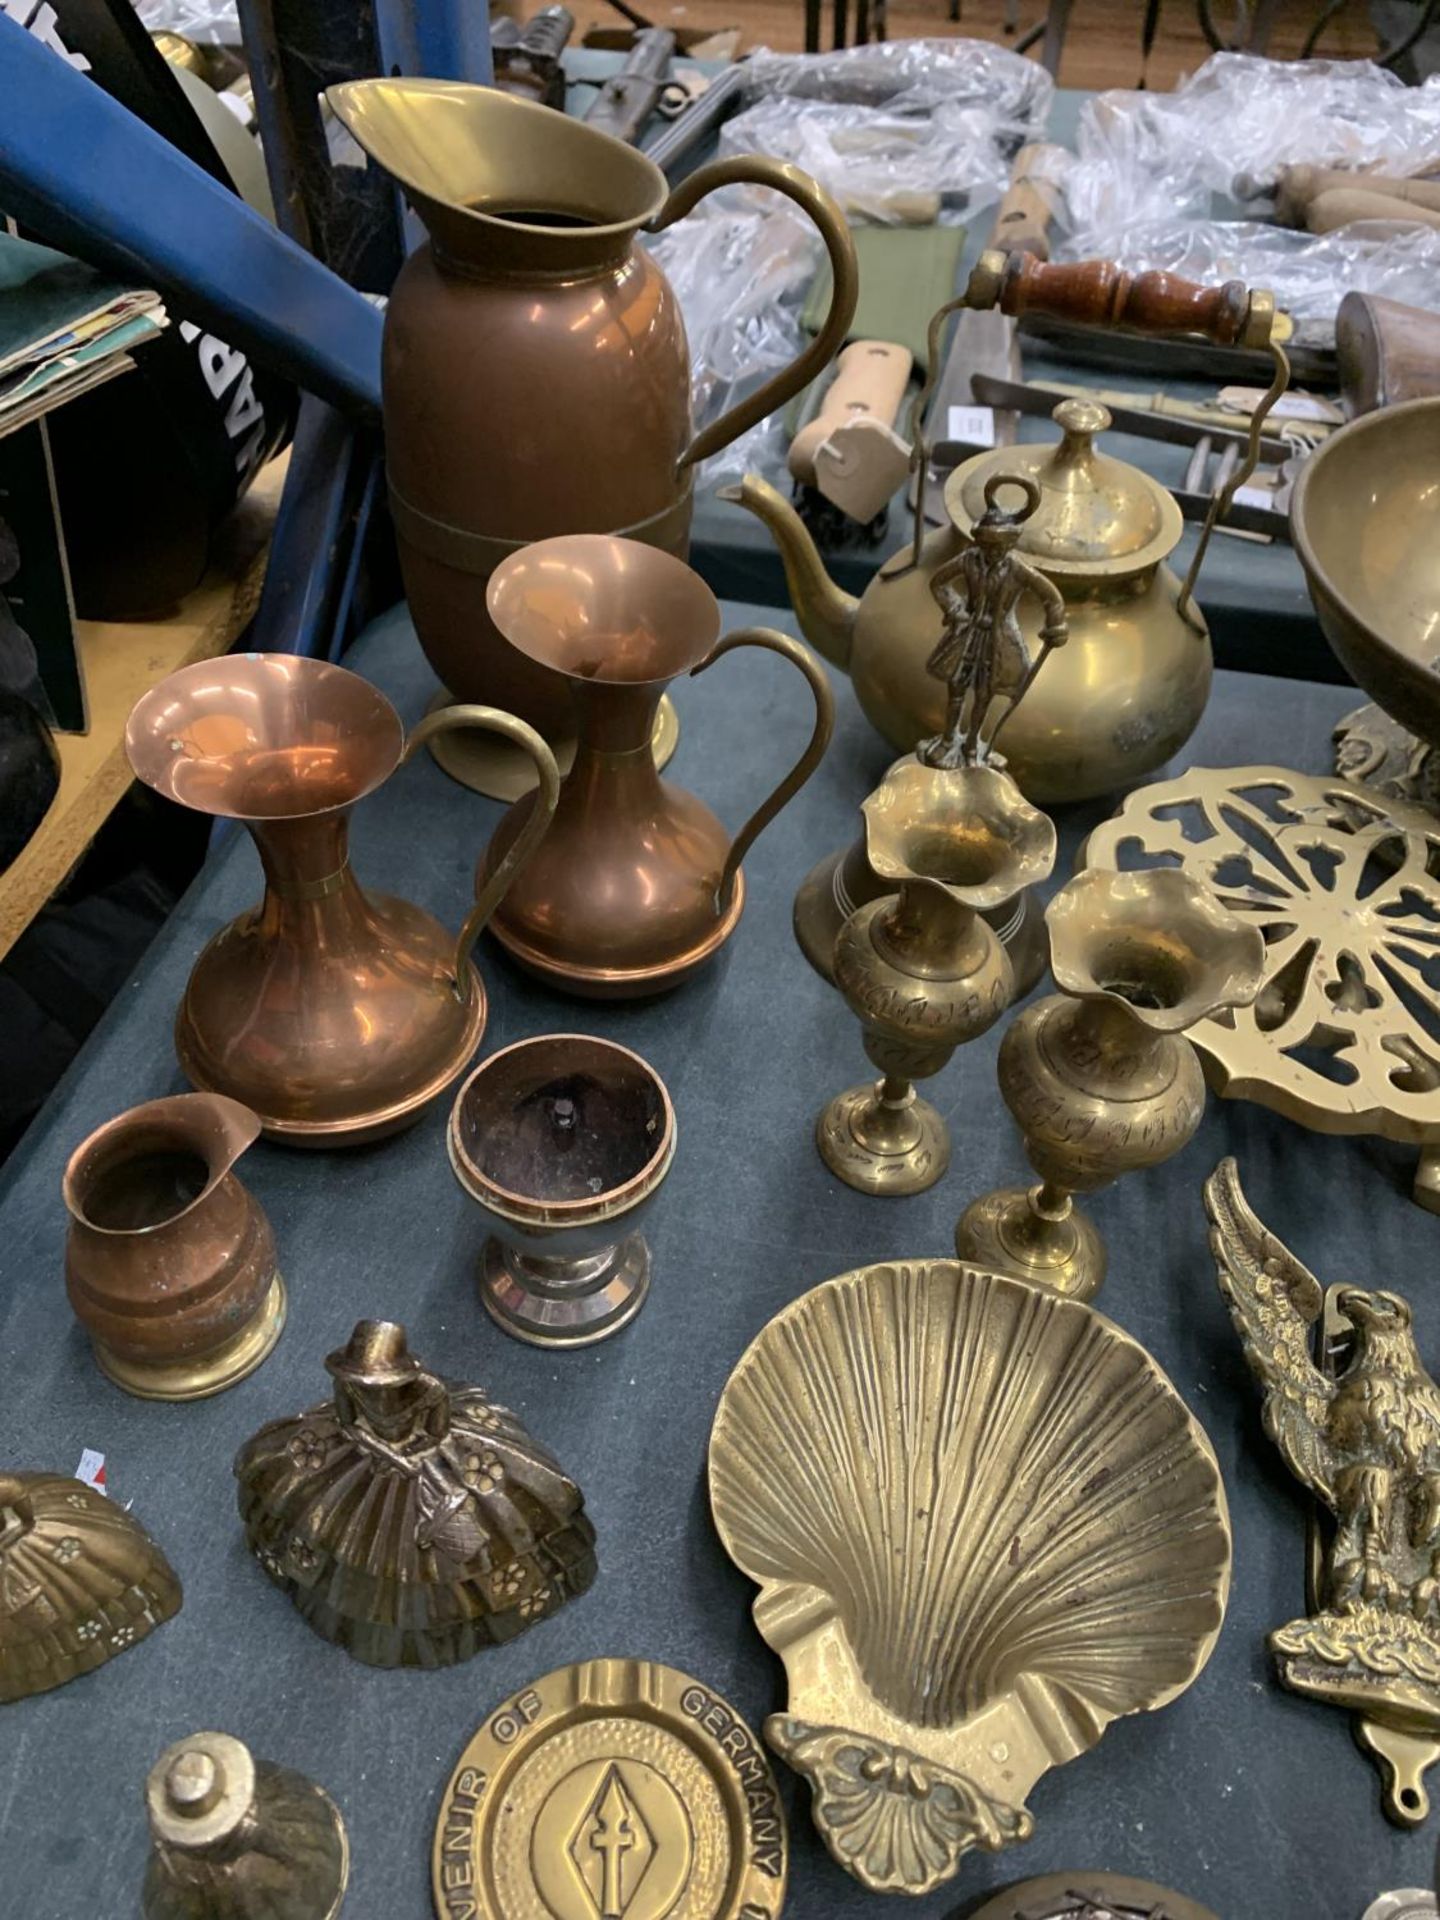 A LARGE COLLECTION OF BRASS AND COPPER WARE TO INCLUDE TRIVETS, BELLS, BOWLS, HORSE BRASSES ETC. - Image 6 of 7